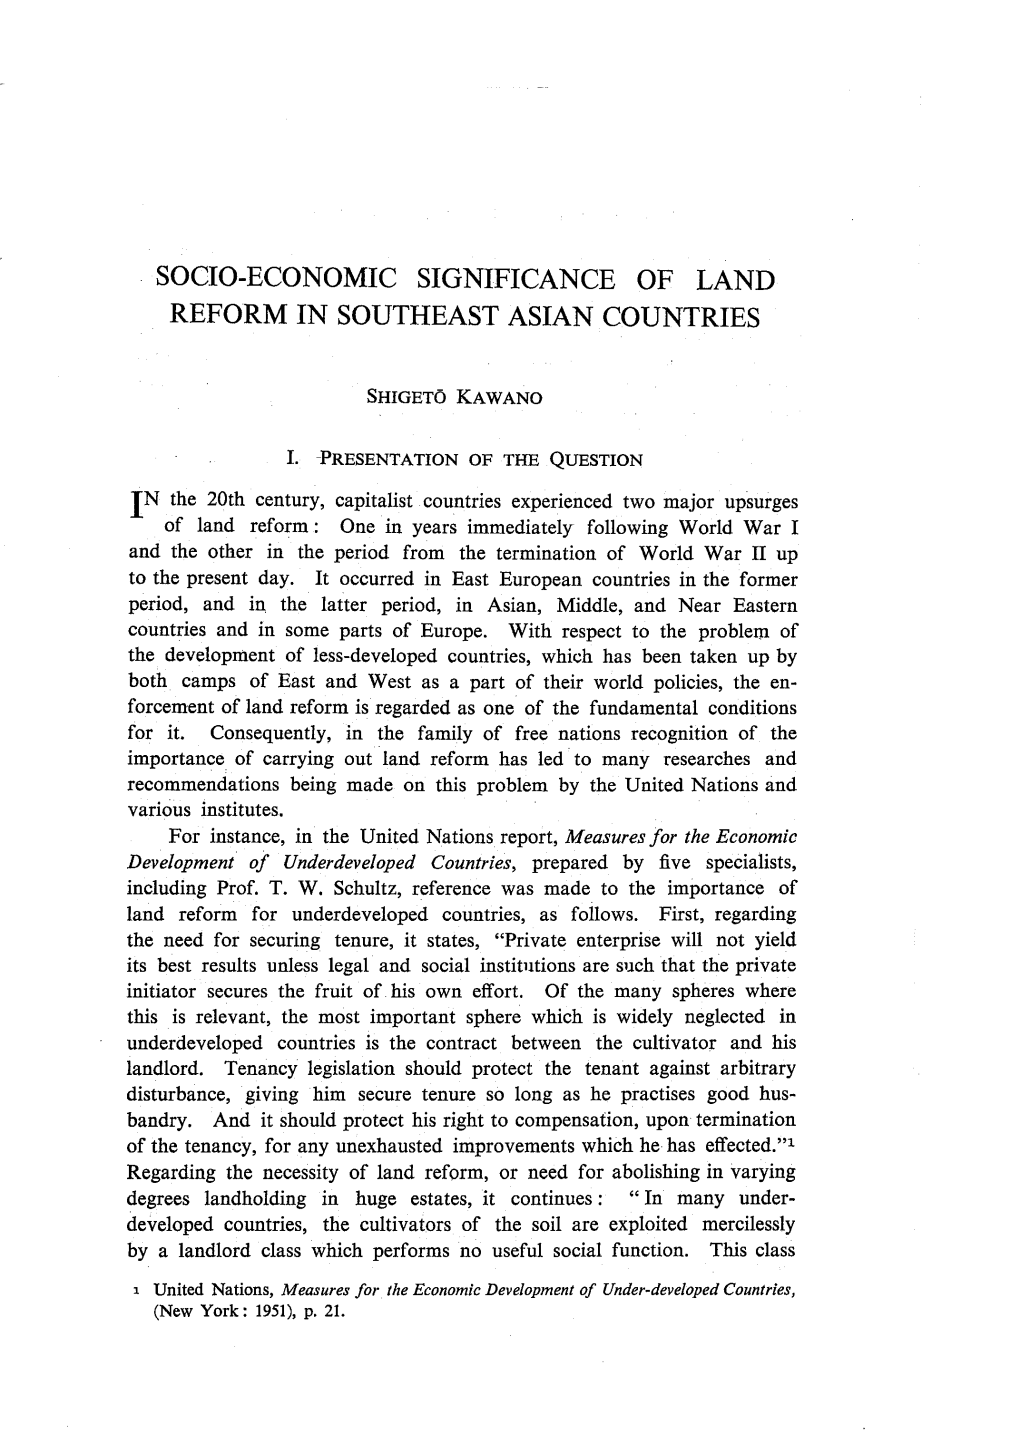 Socio-Economic Significance of Land Reform in Southeast Asian Countries